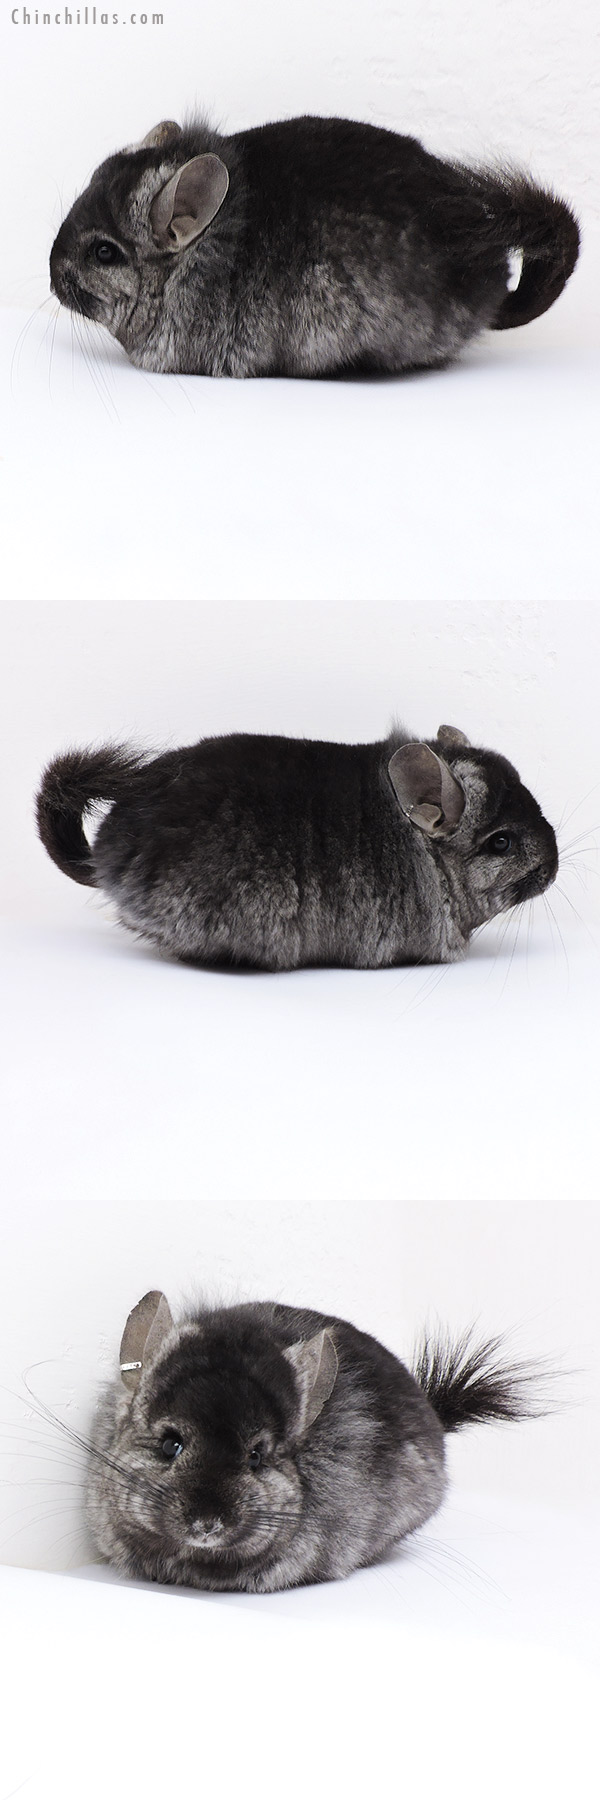 Chinchilla or related item offered for sale or export on Chinchillas.com - 18096 Blocky Ebony  Royal Persian Angora ( Locken Carrier ) Female Chinchilla with Lion Mane